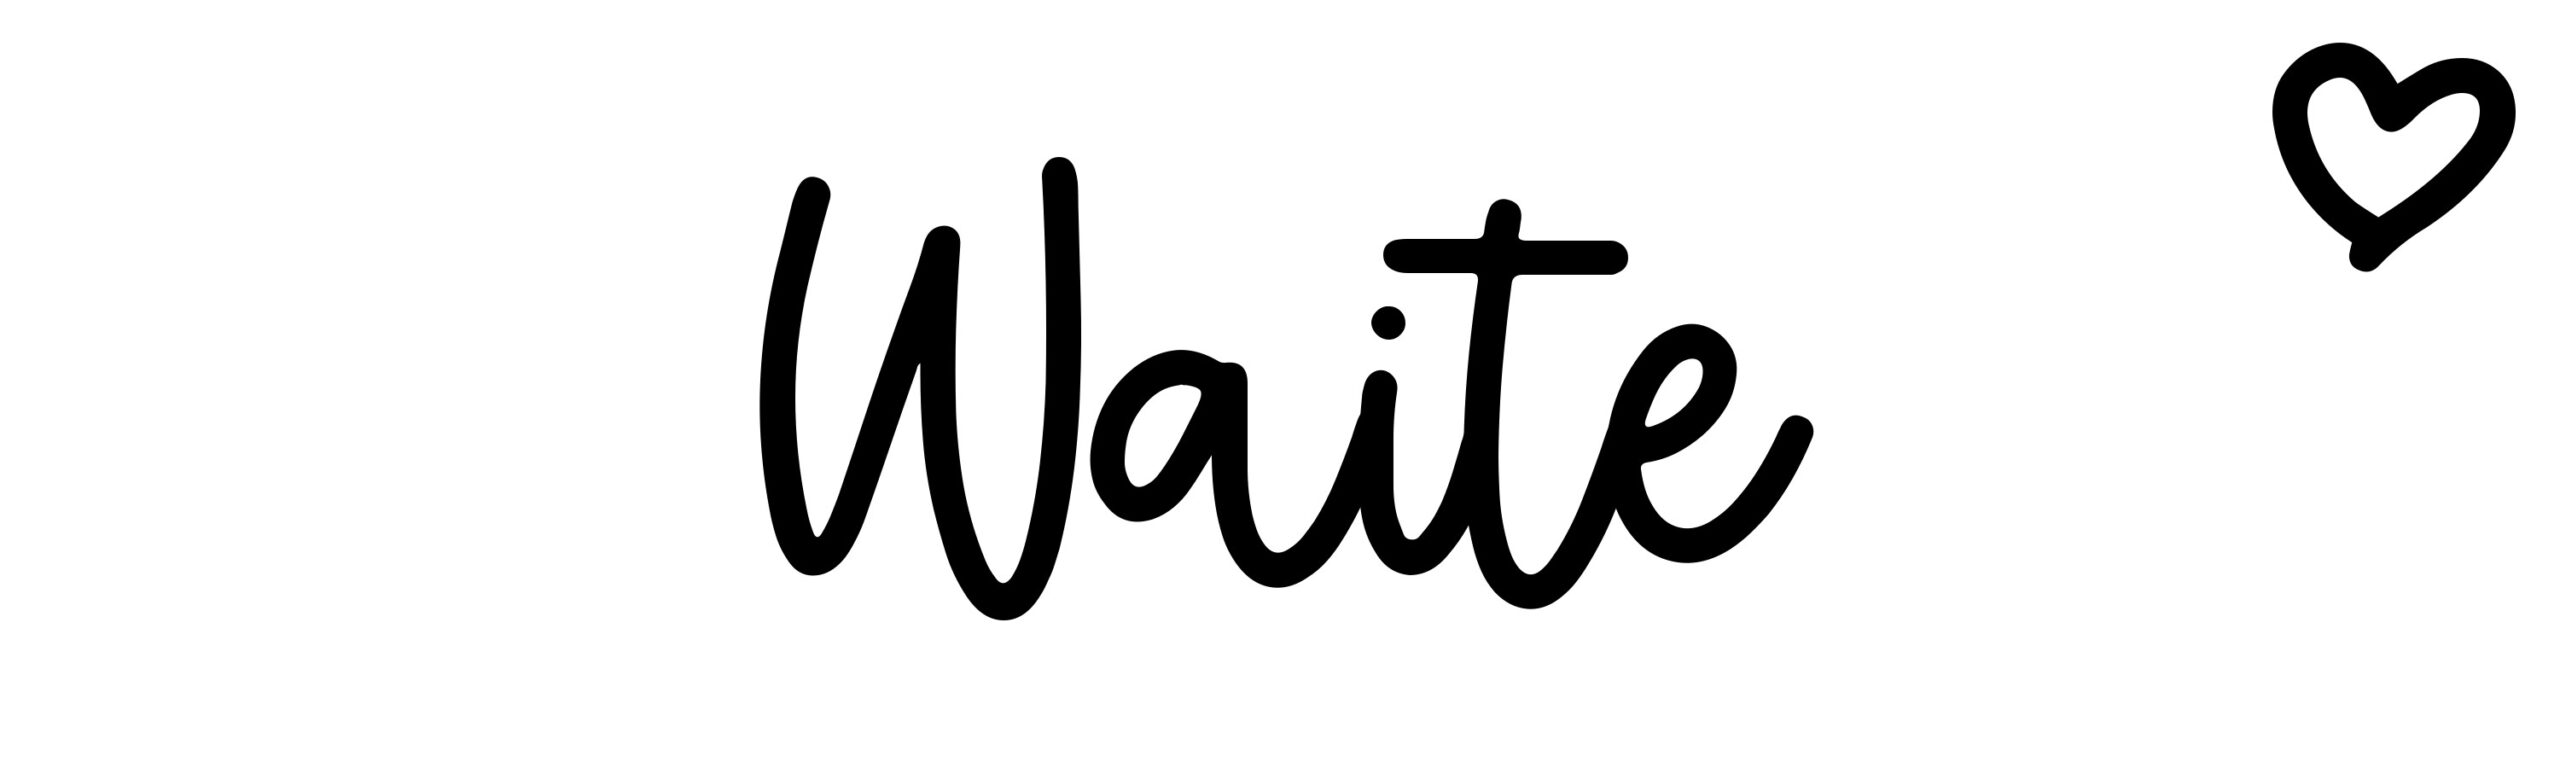 Waite - Name meaning, origin, variations and more